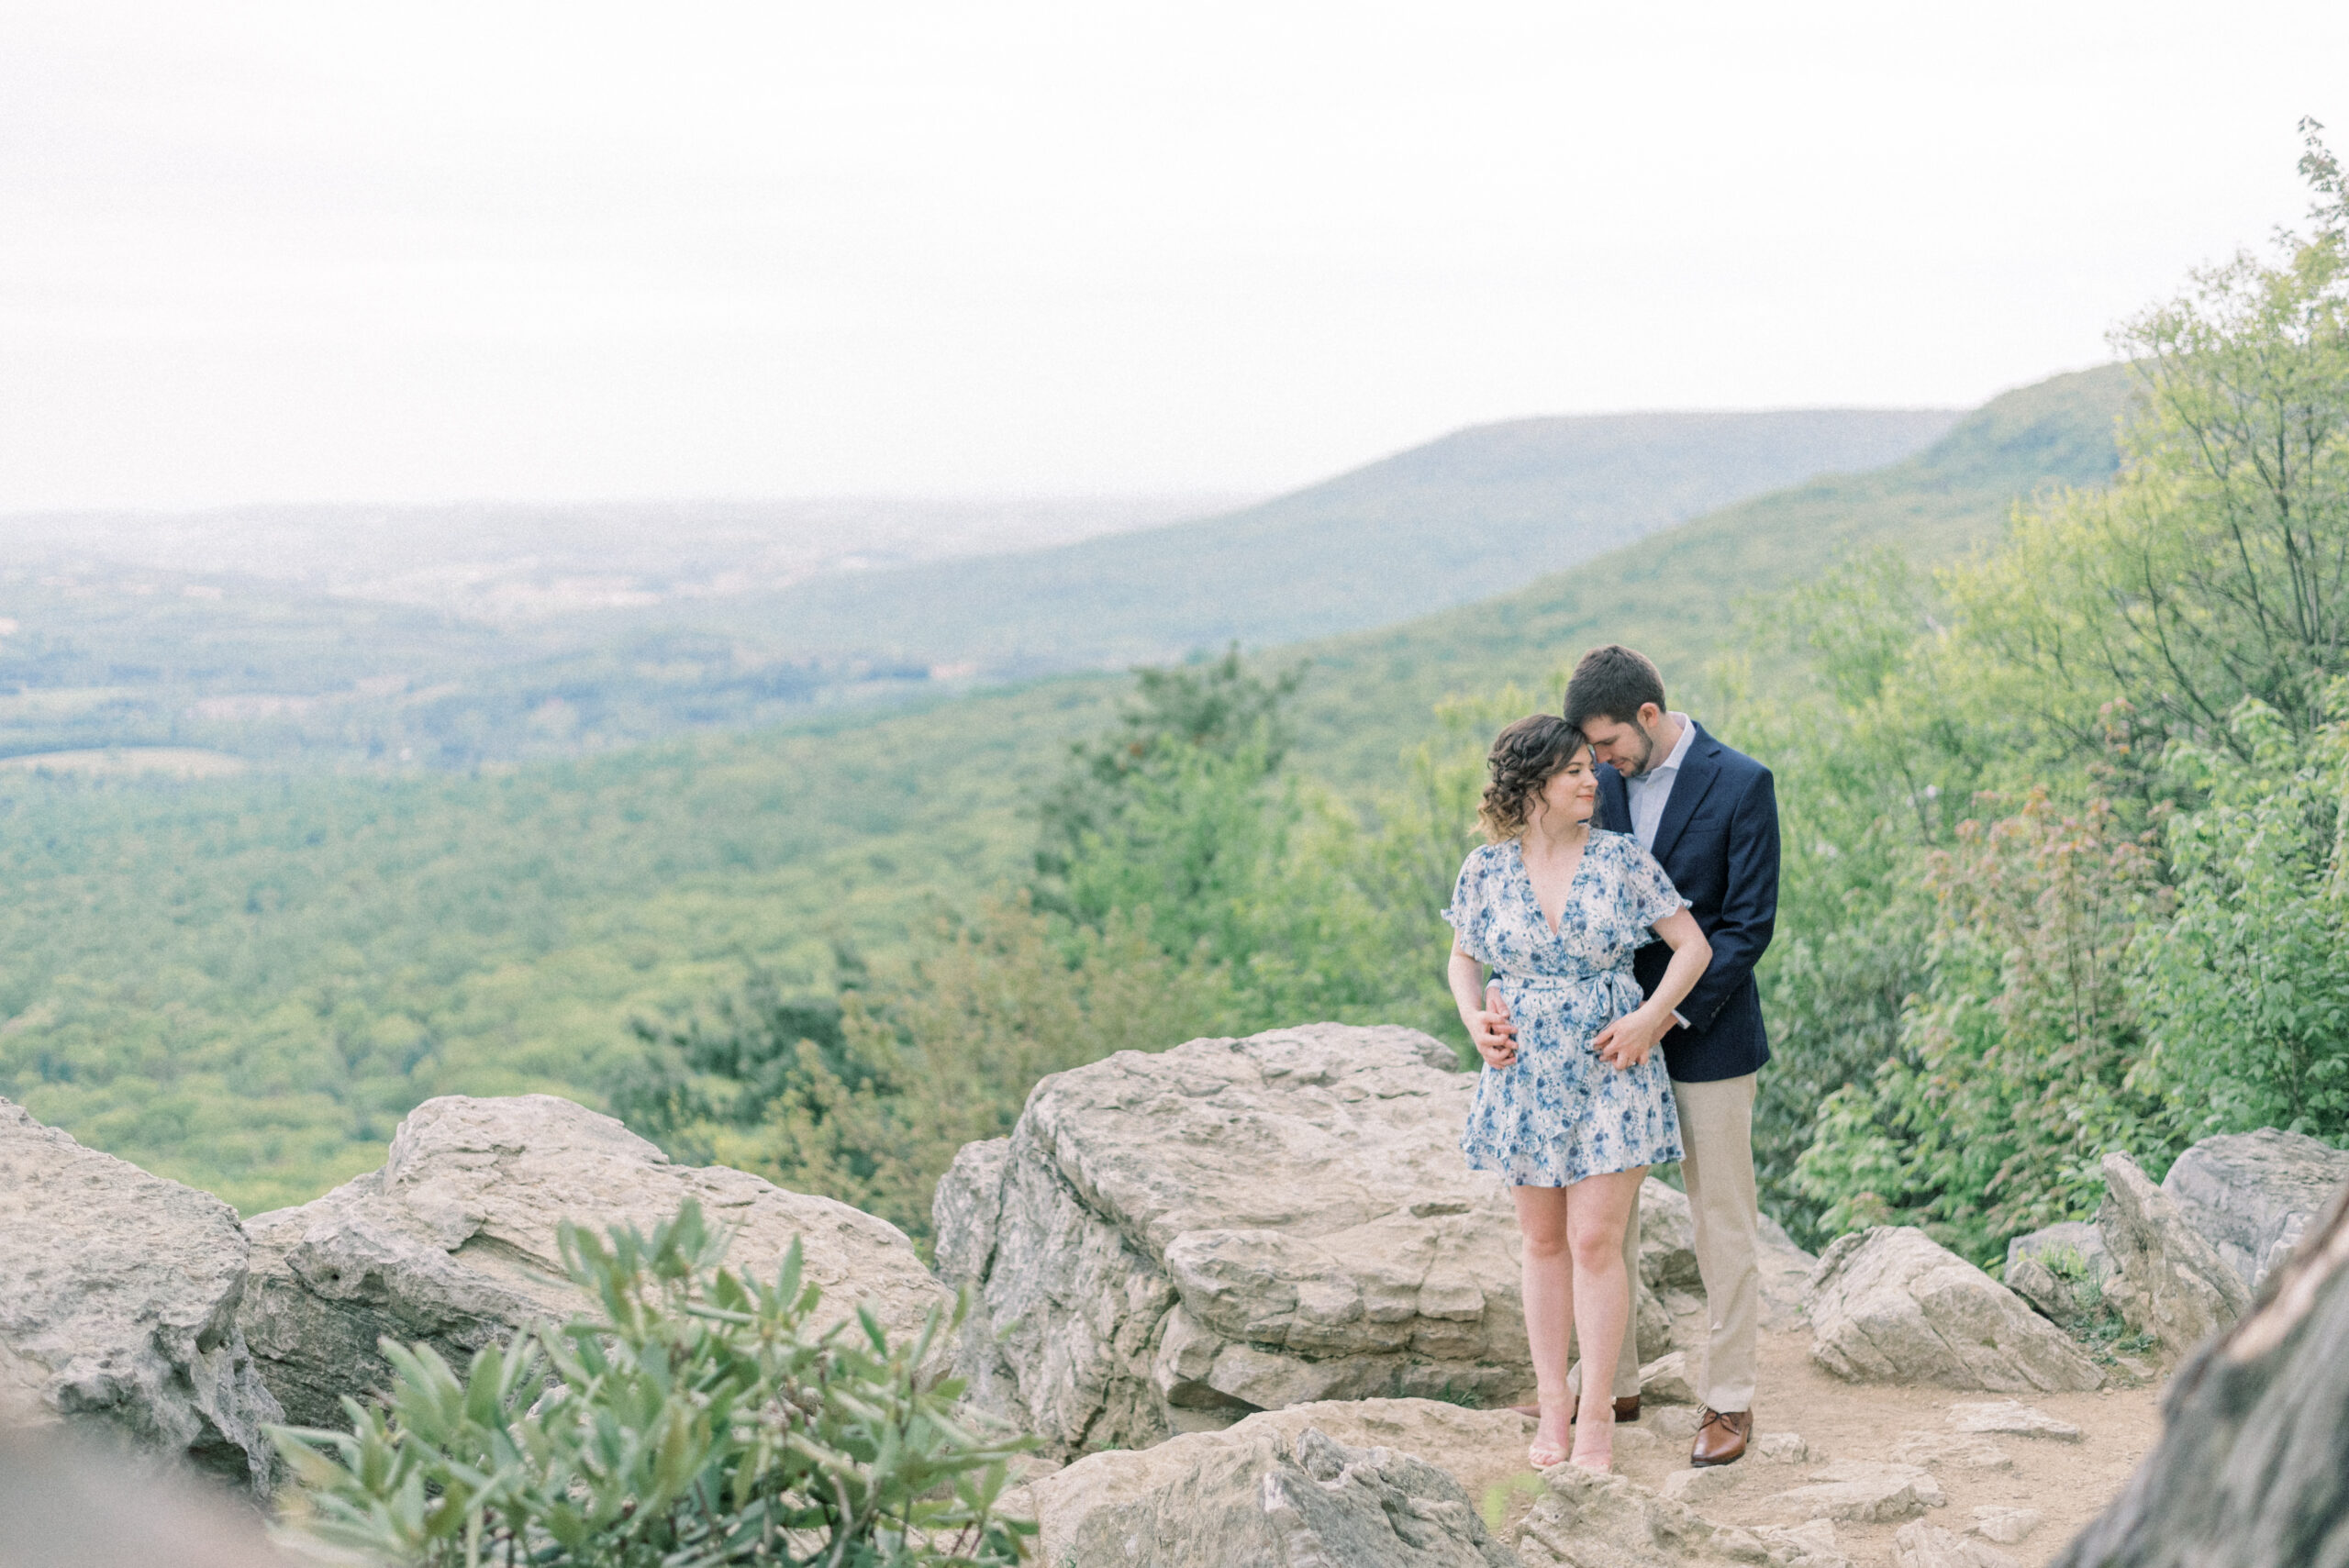 Maryland wedding photographer captures man hugging woman from behind